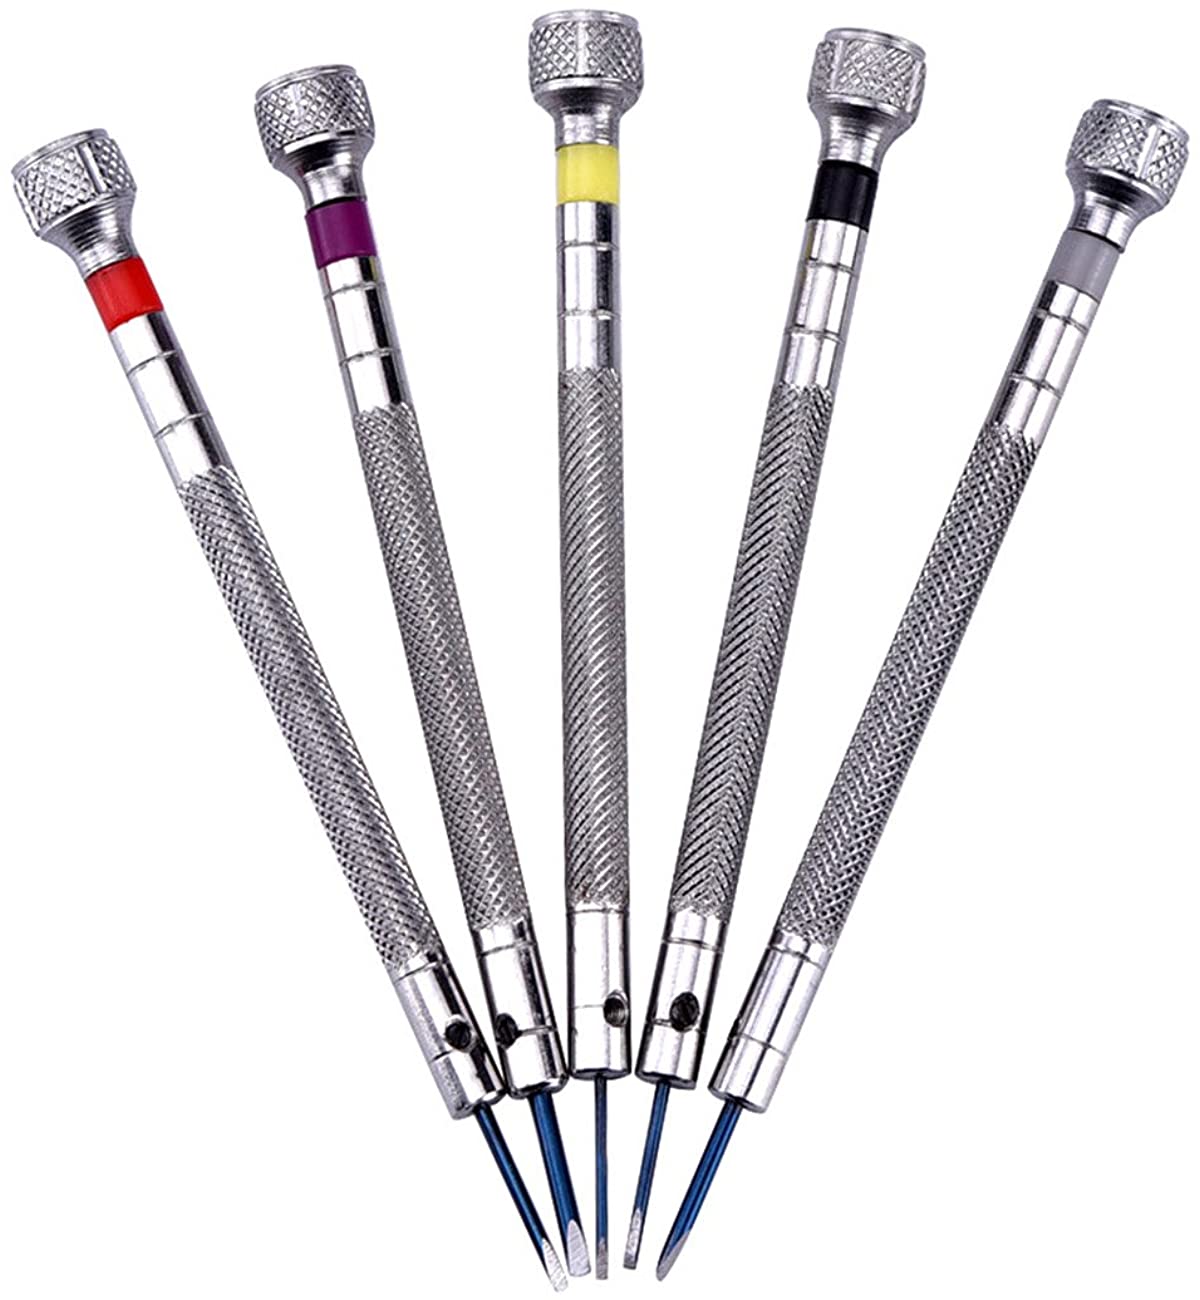 5 Pieces Watchmakers Jewelers Screwdrivers Set with 5 Replacement Tips